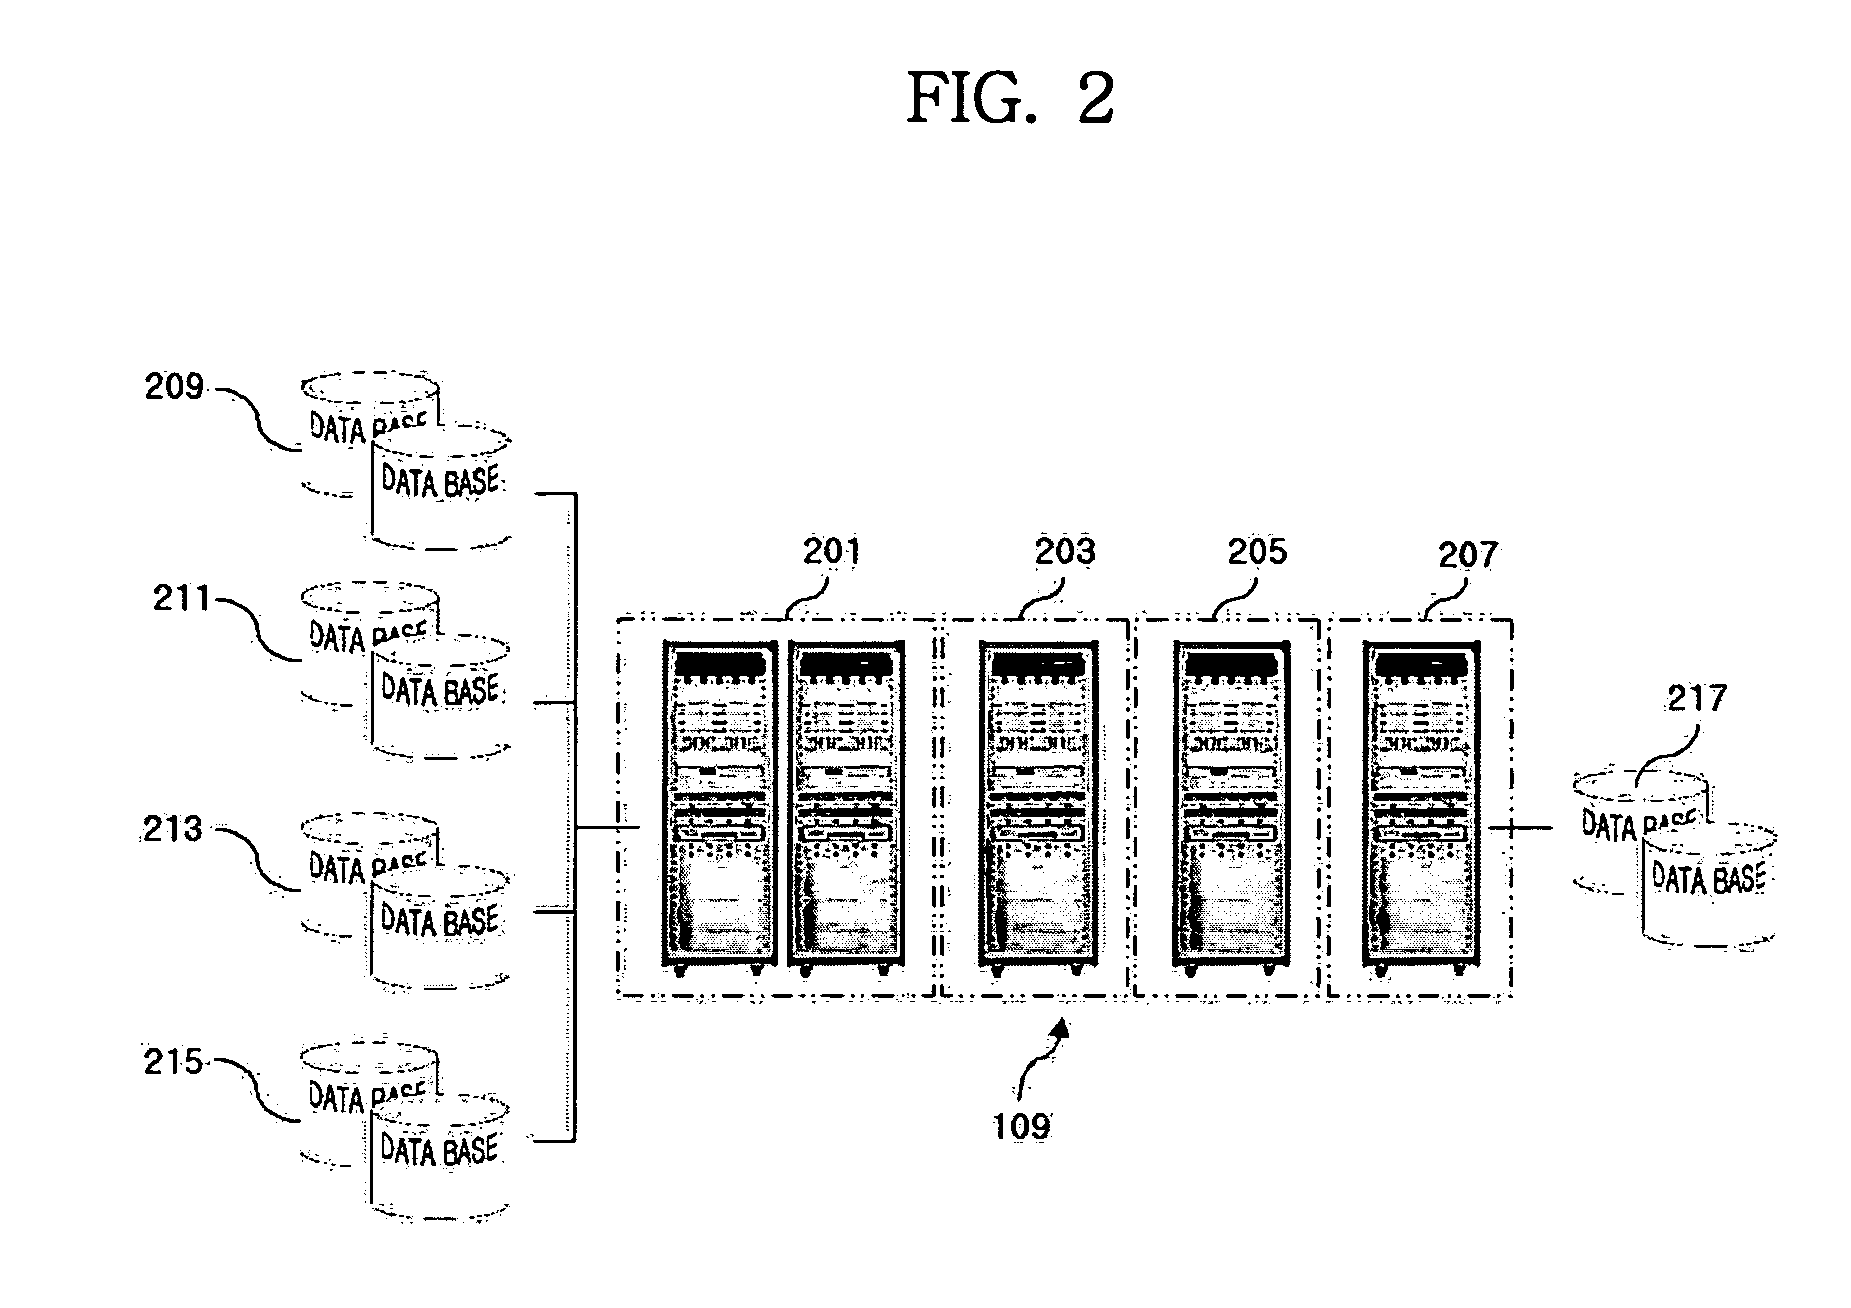 Real-time knowledge information search system using wired/wireless networks, method for searching knowledge information in real time, and method for registering/managing knowledge information in real time